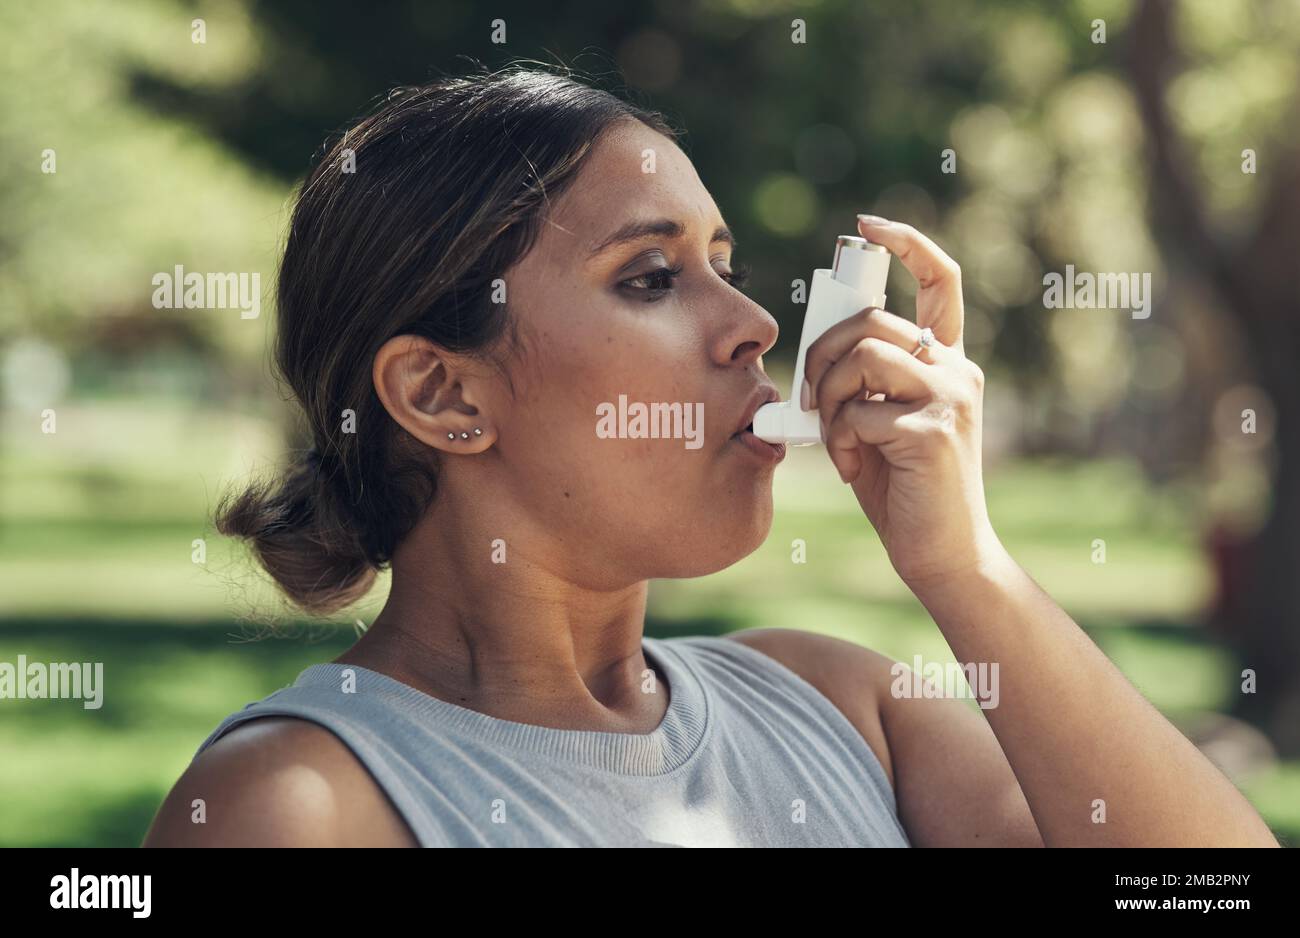 I always need to have my pump on me. a young woman taking a break during a workout to use her asthma pump. Stock Photo